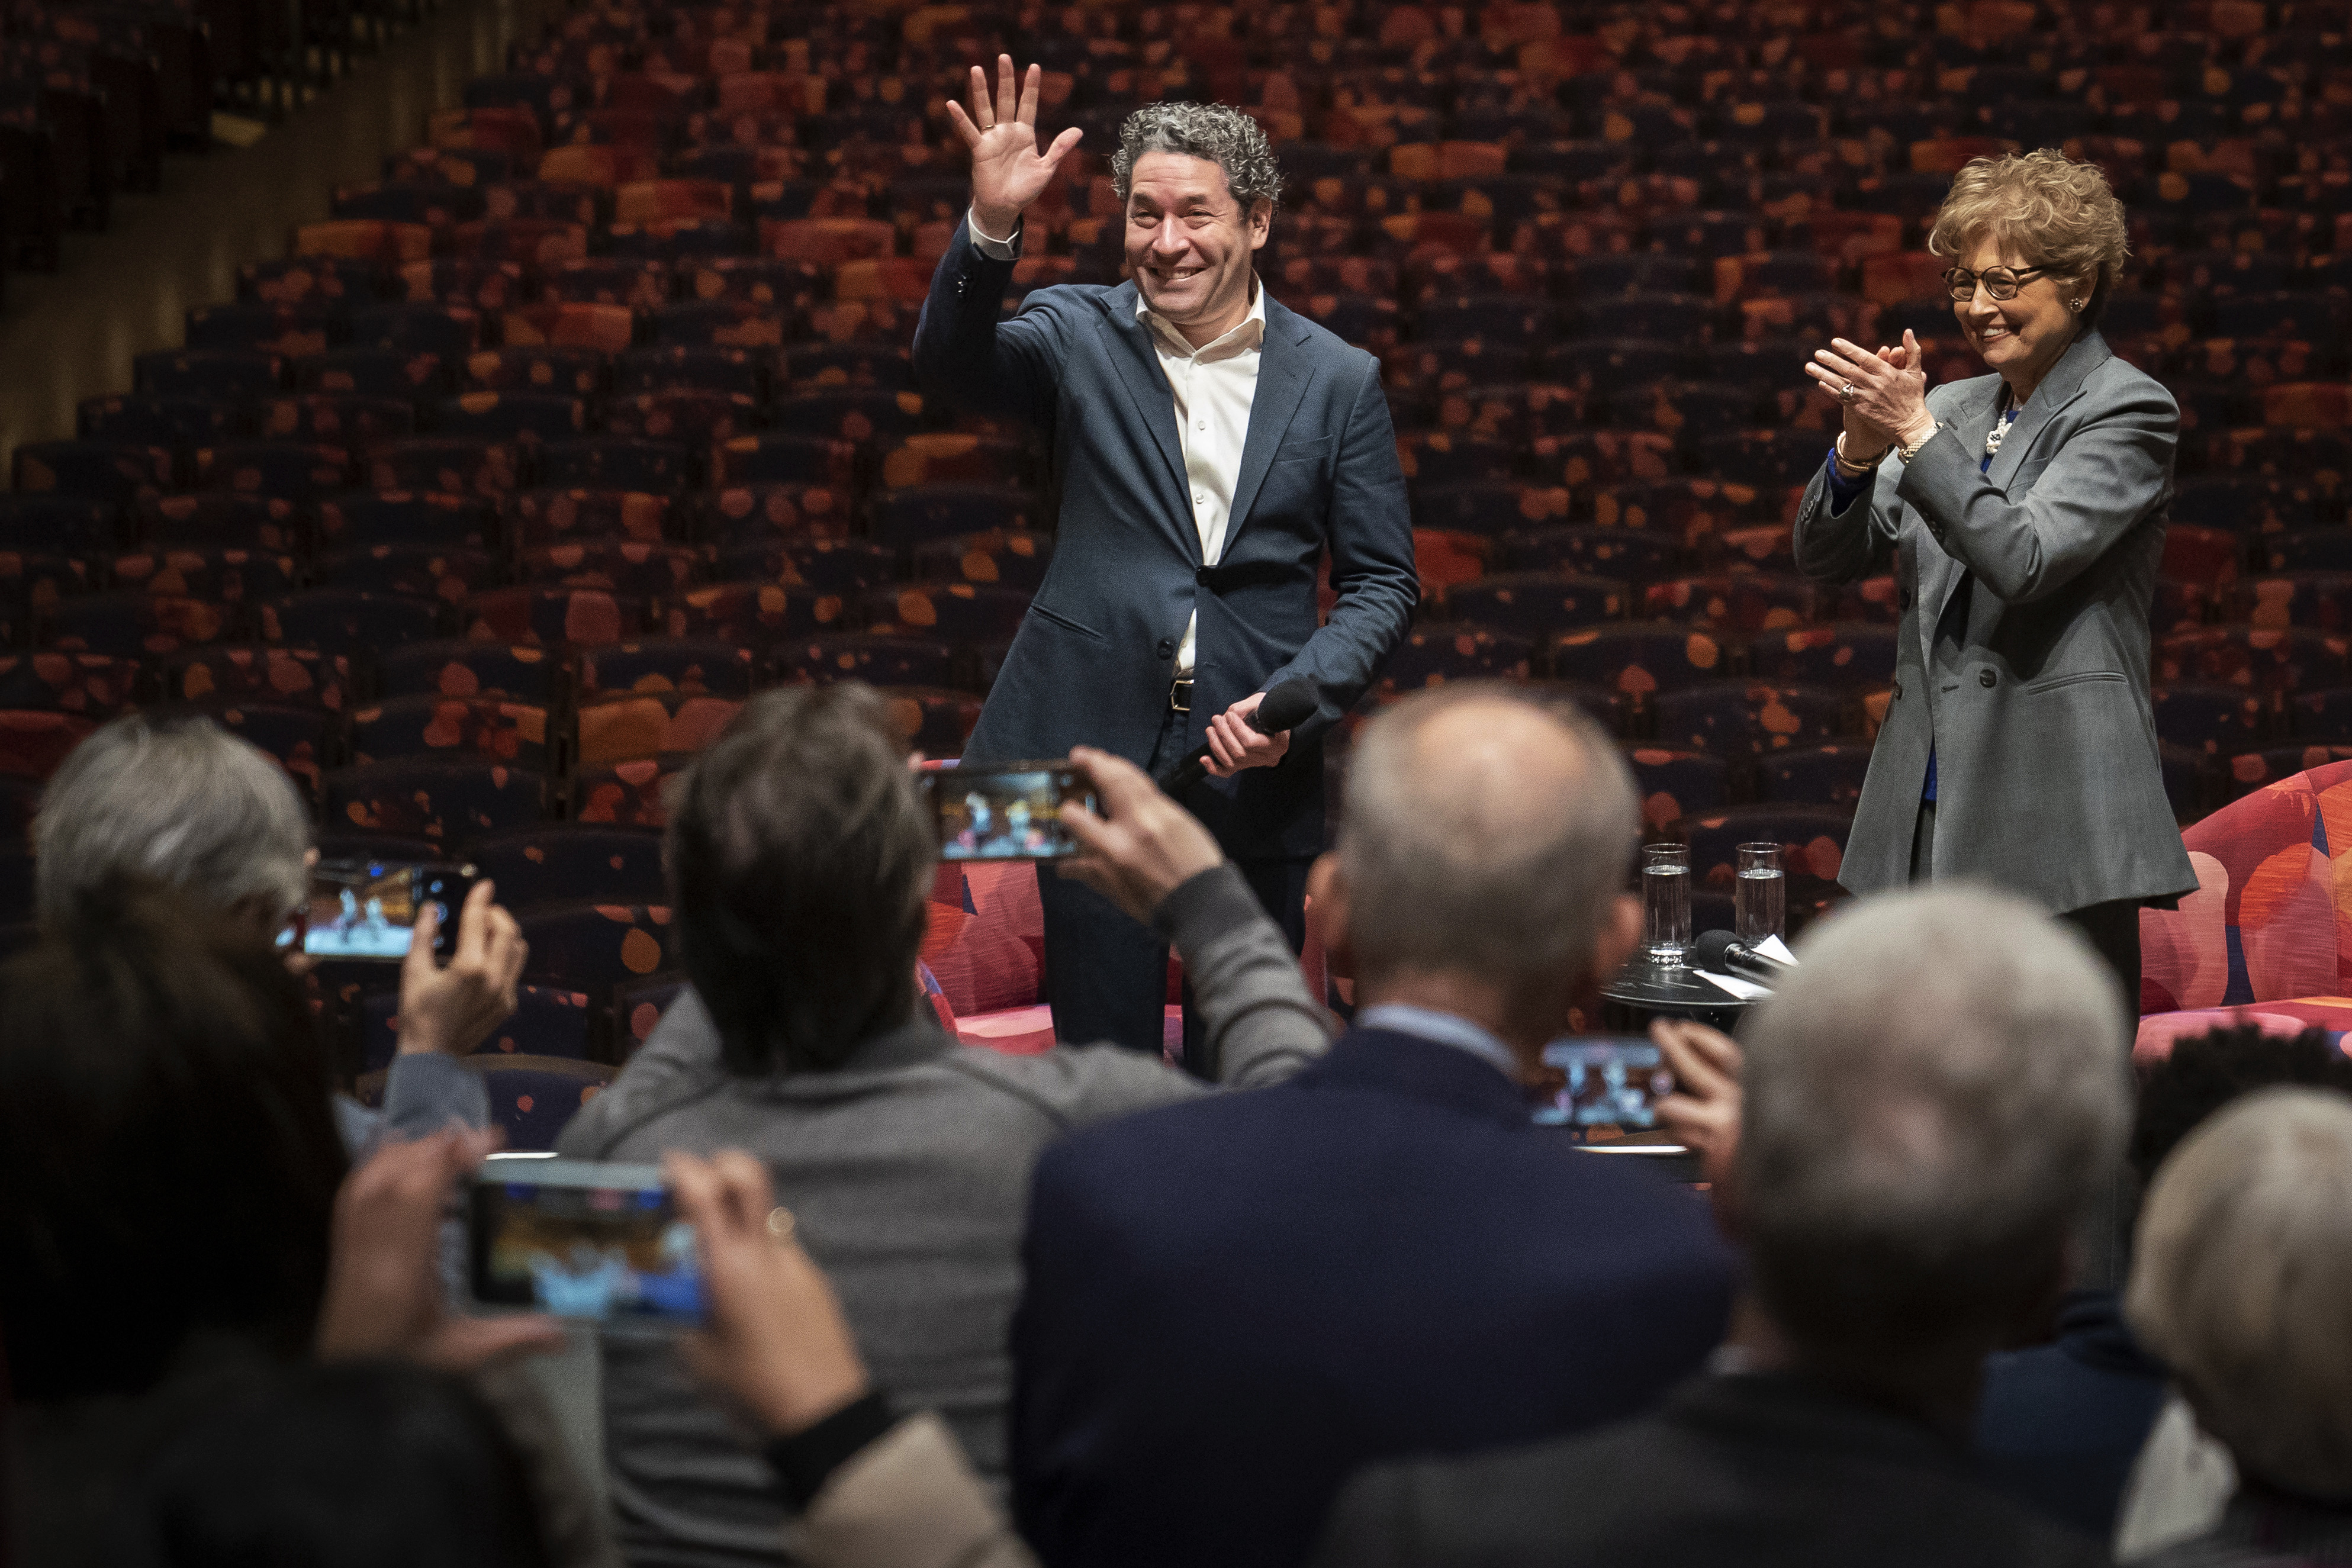 Gustavo Dudamel to Exit L.A. for New York Philharmonic in 2026